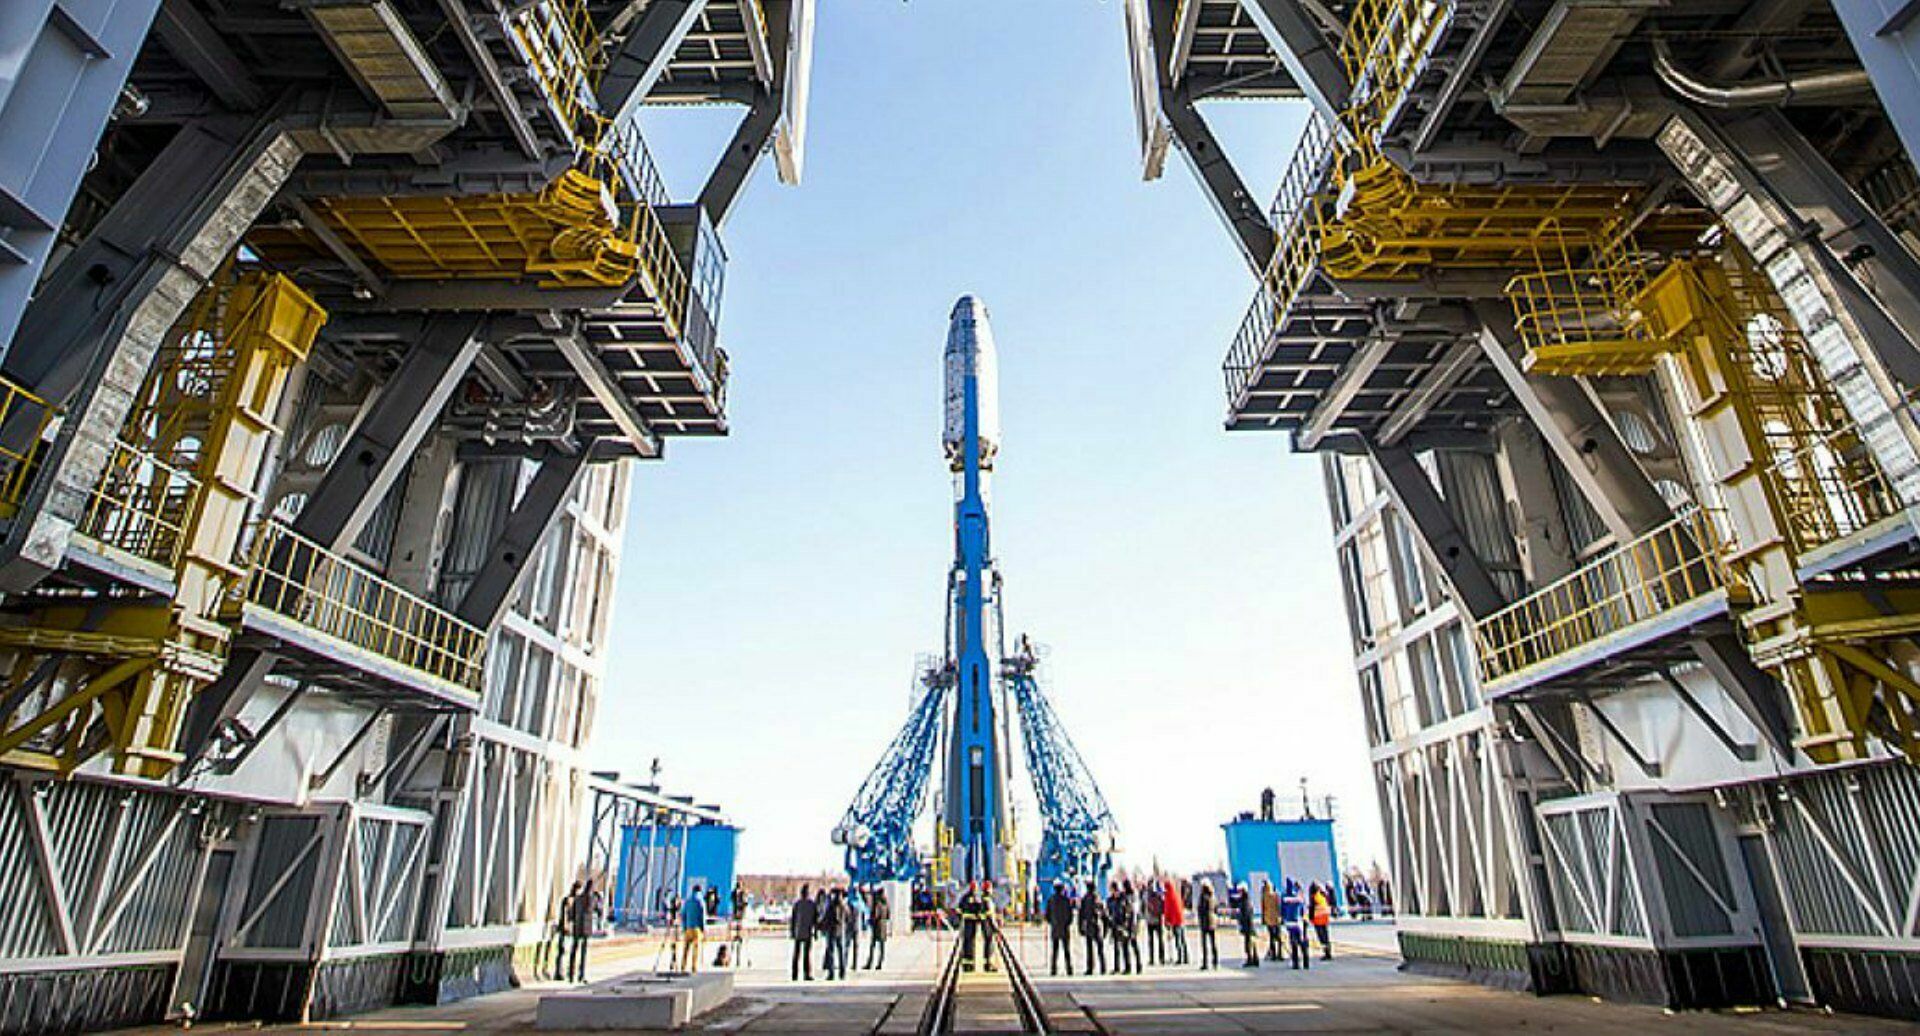 Roscosmos will spend more than 763 million rubles. to finalize the "East"